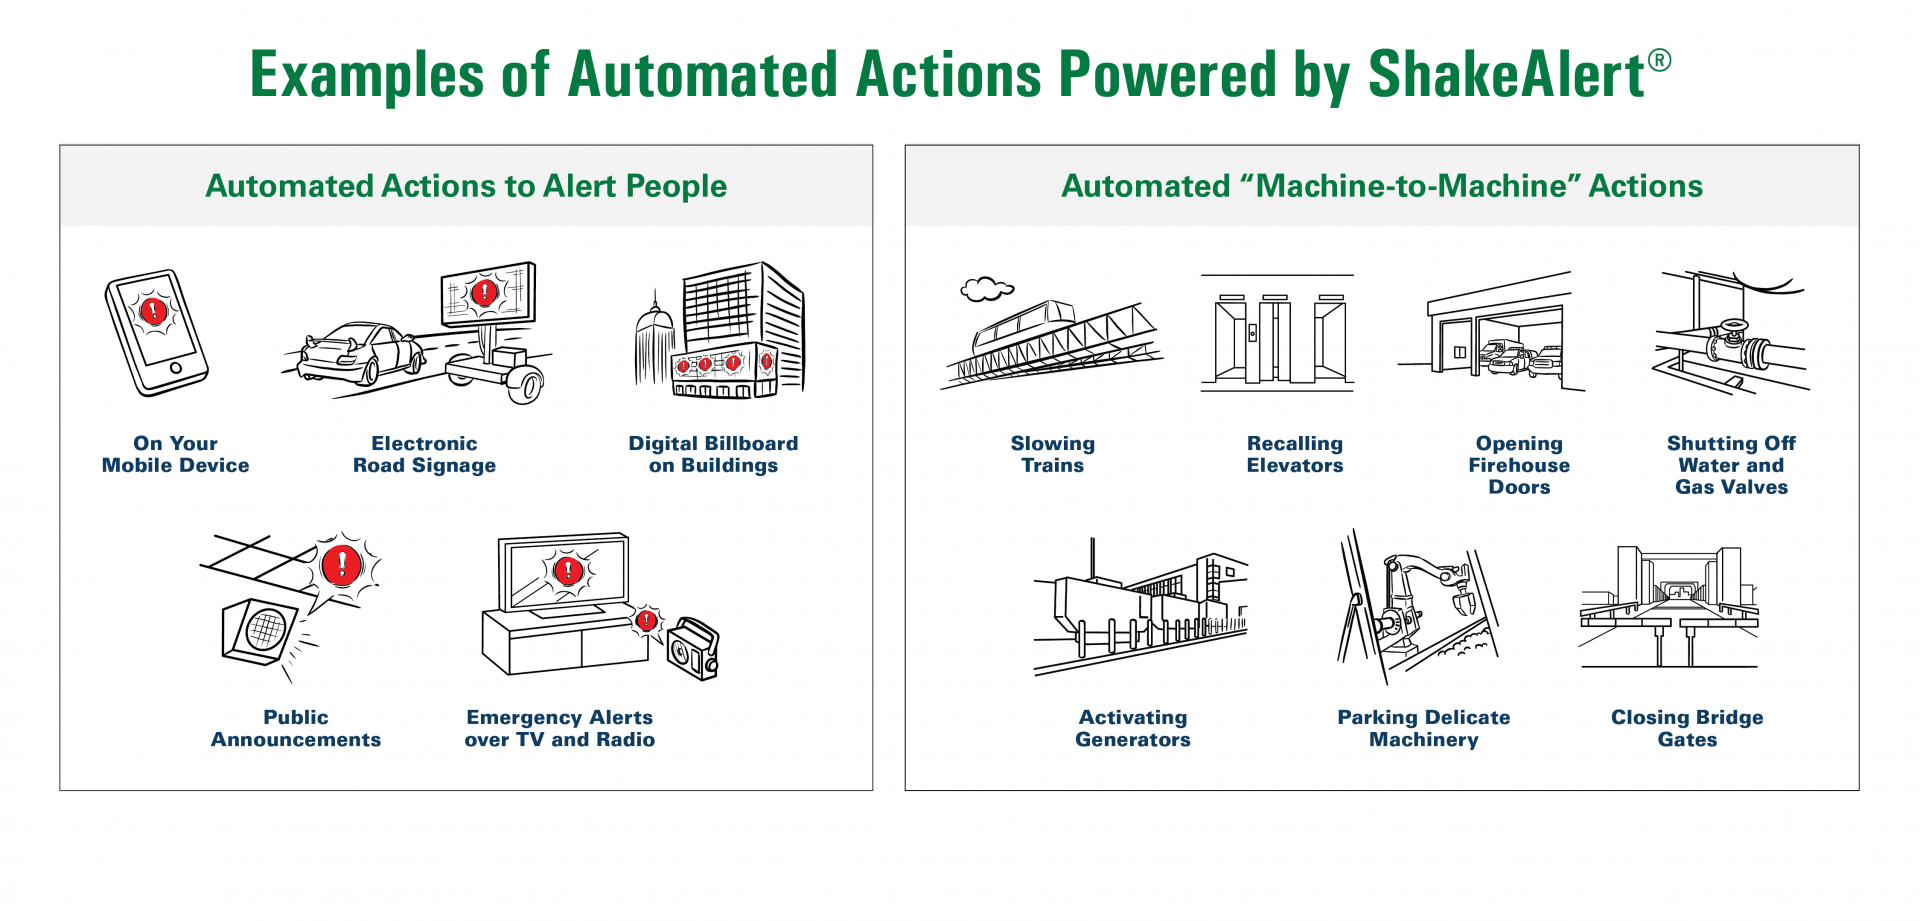 The graphic shows examples of automated actions powered by the ShakeAlert Earthquake Early Warning System.